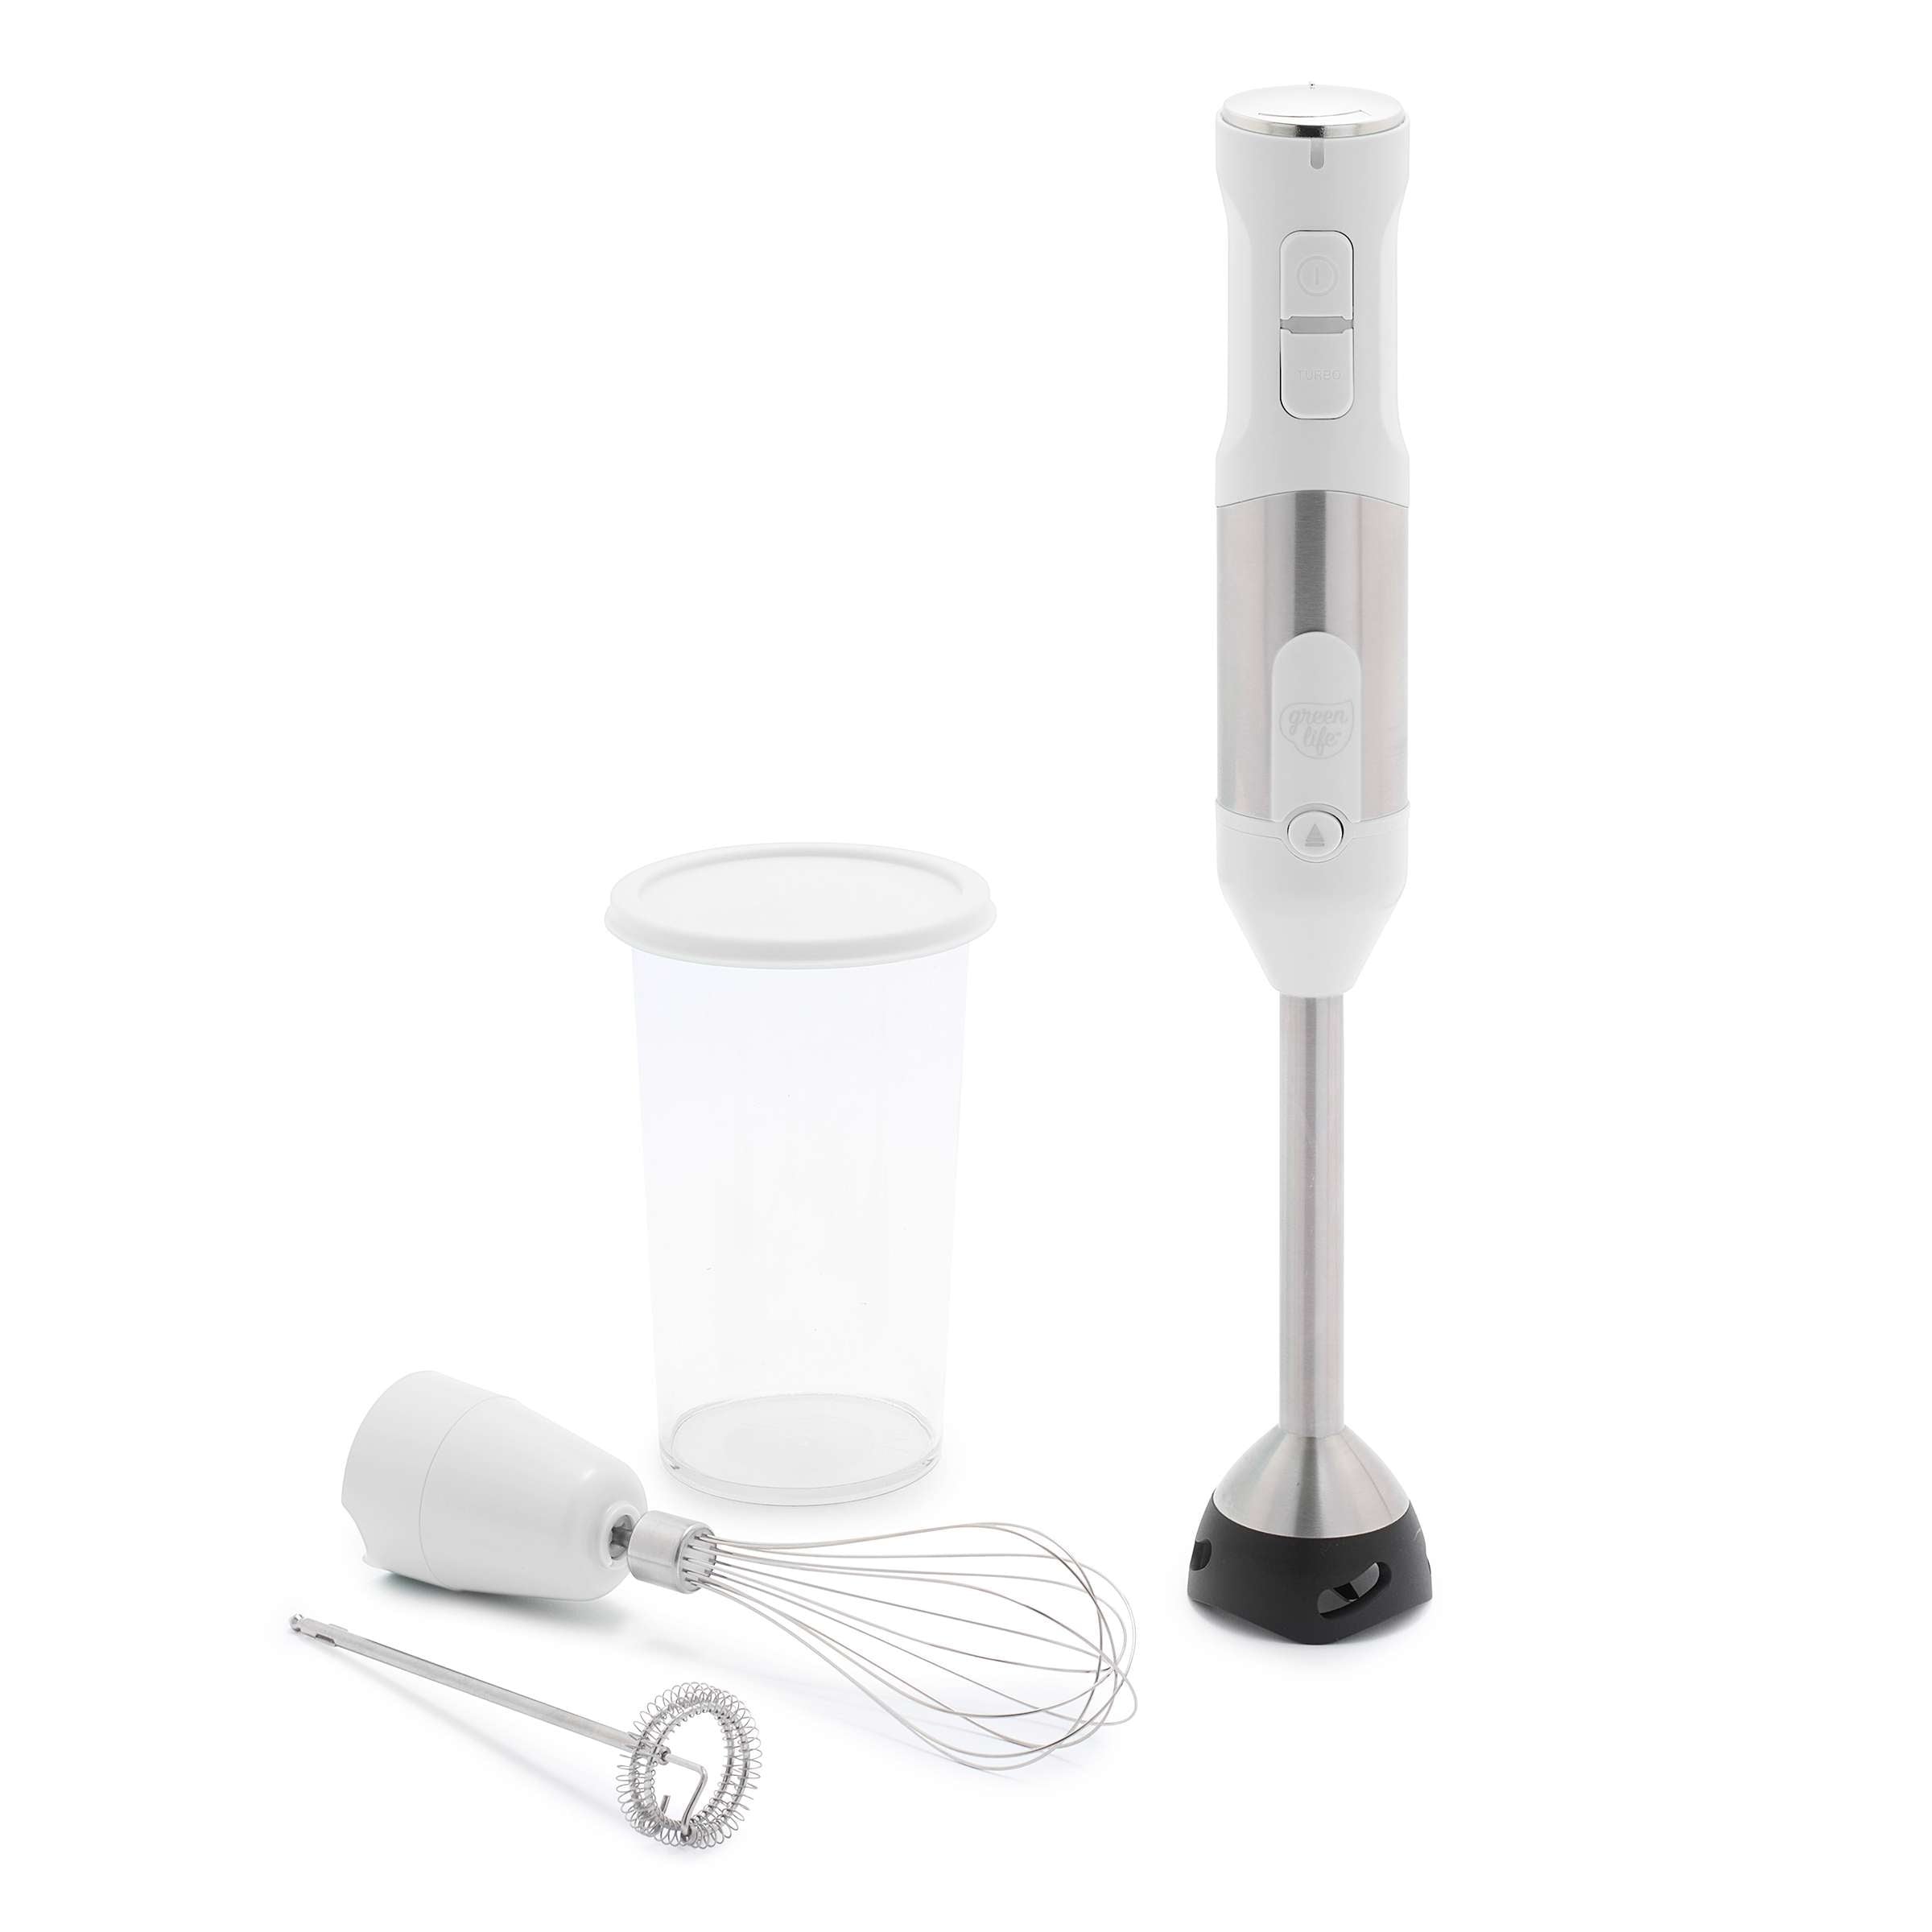 GreenLife Electric Variable Speed Hand Blender - On Sale - Bed Bath &  Beyond - 38345707